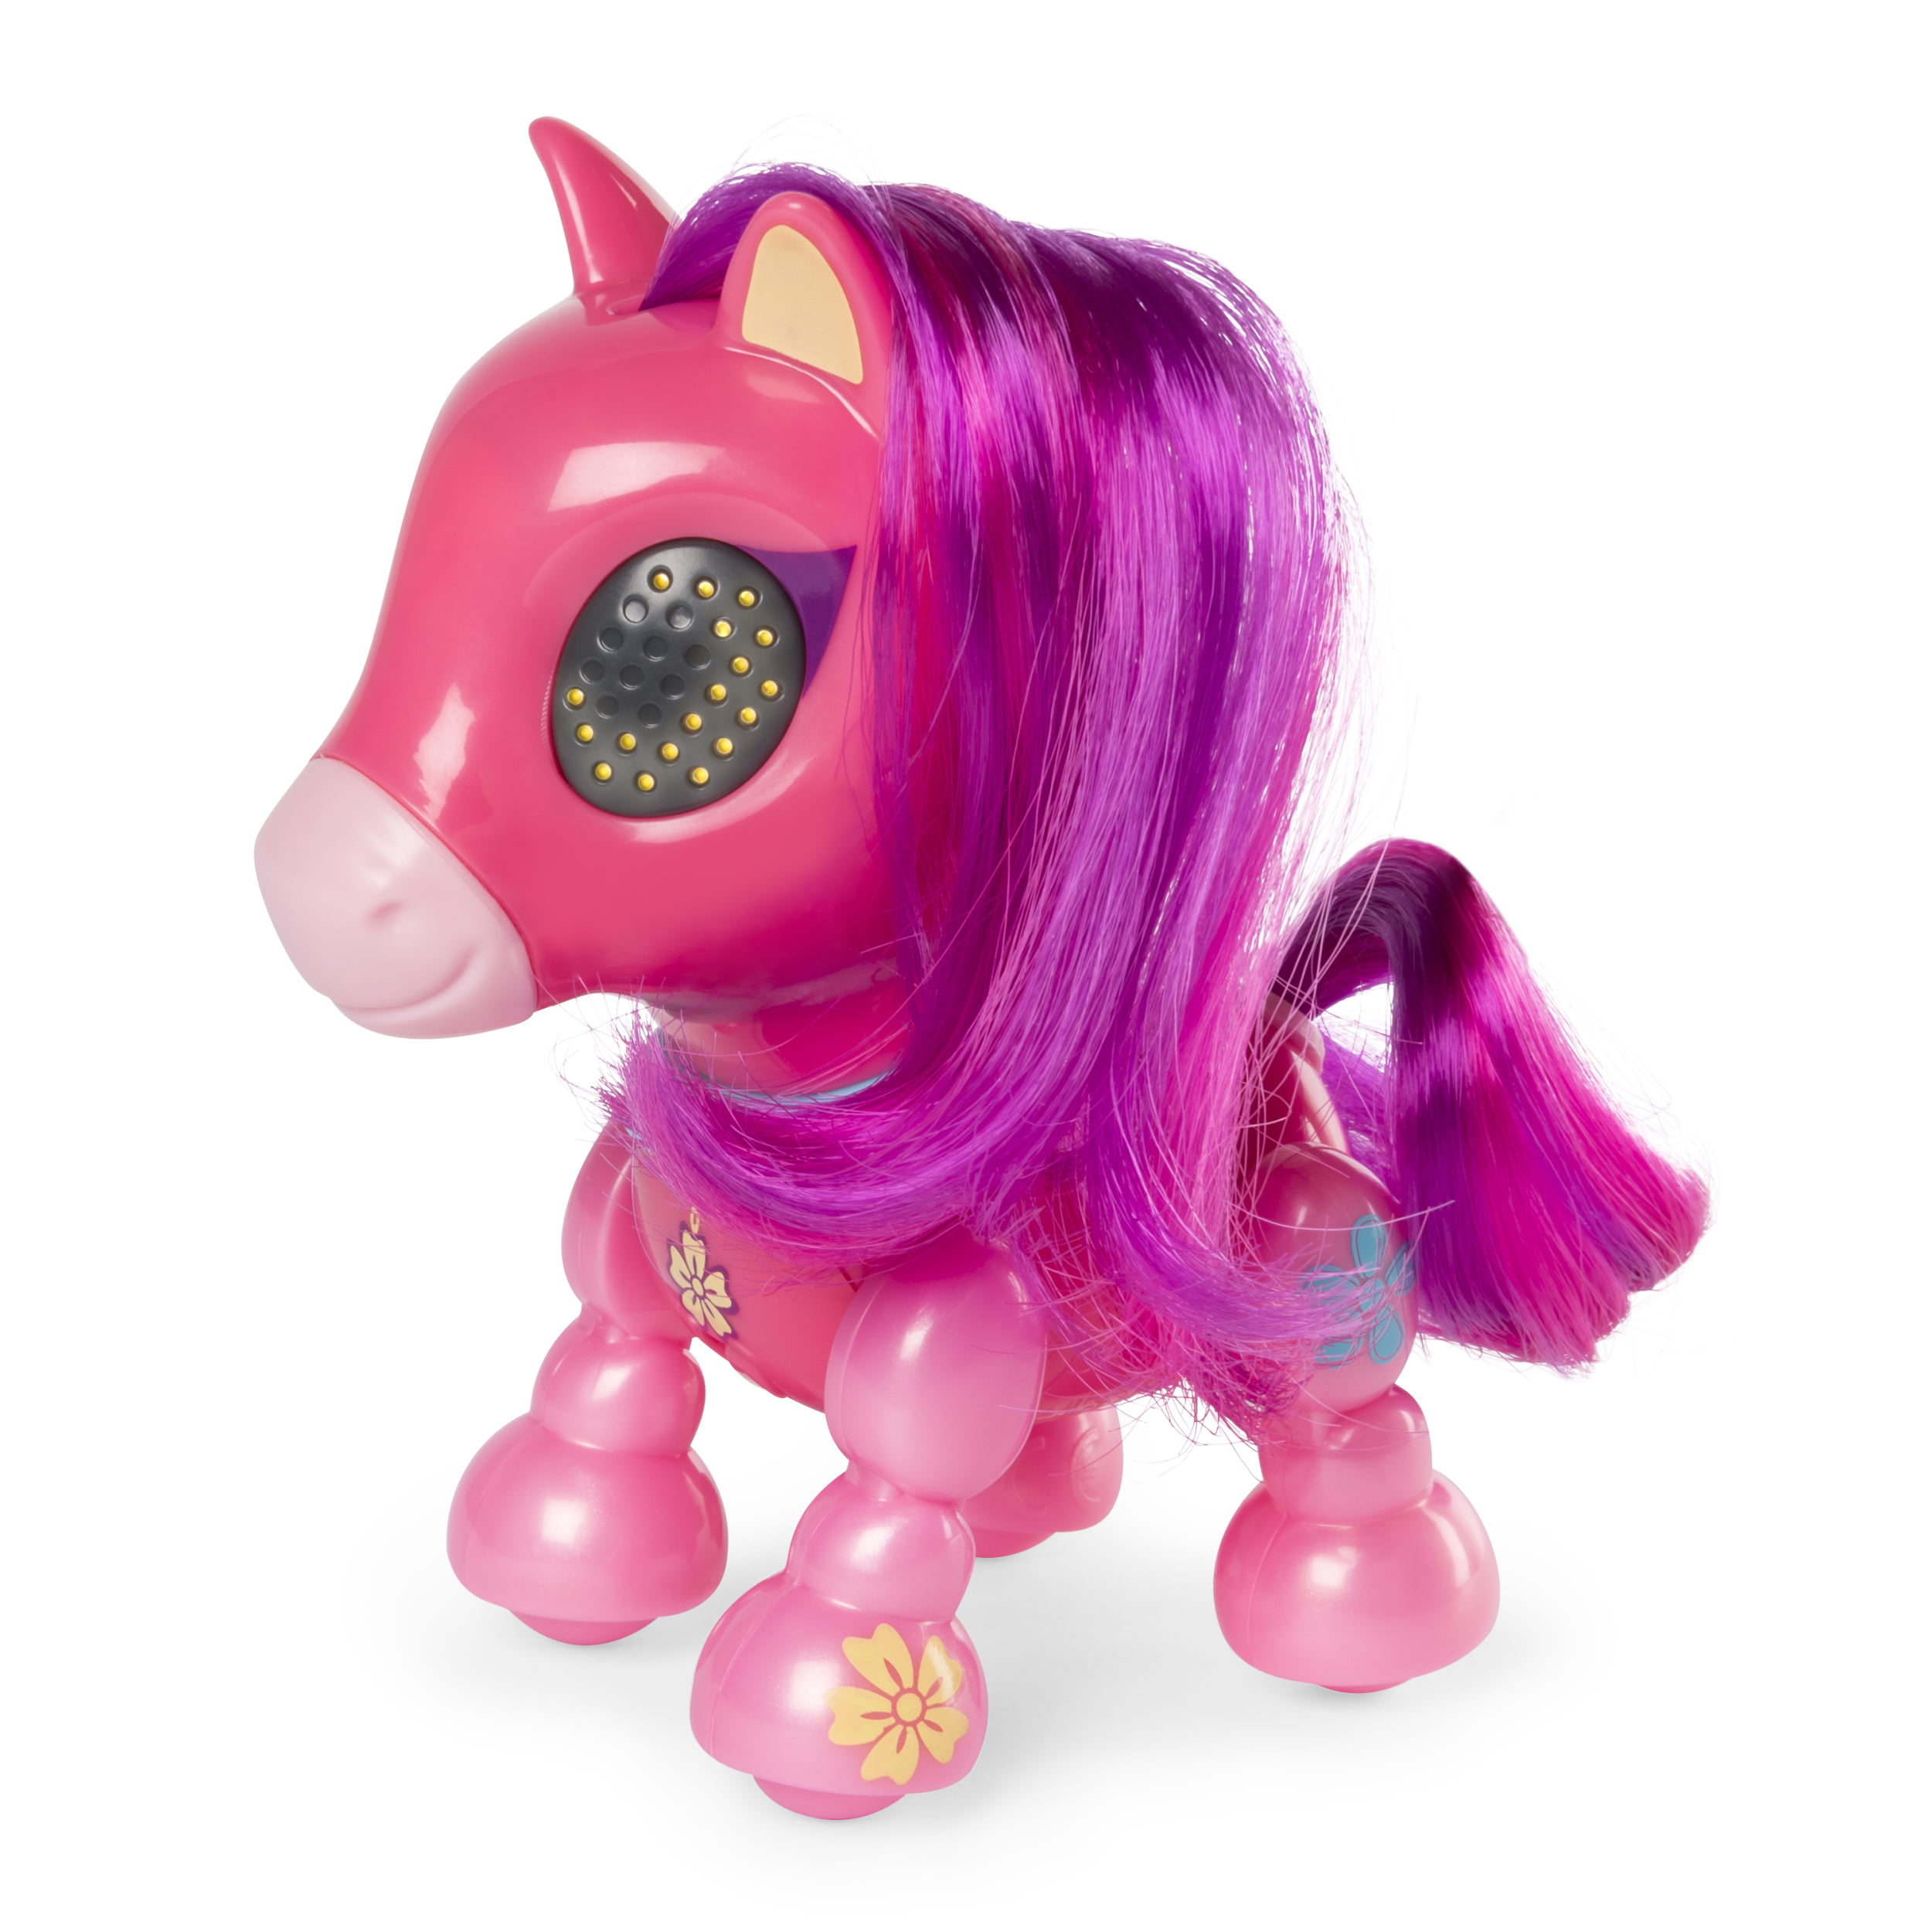 Series 1 Zoomer Zupps Pretty Ponies Sounds and Sensors Electra Interactive Pony with Lights 